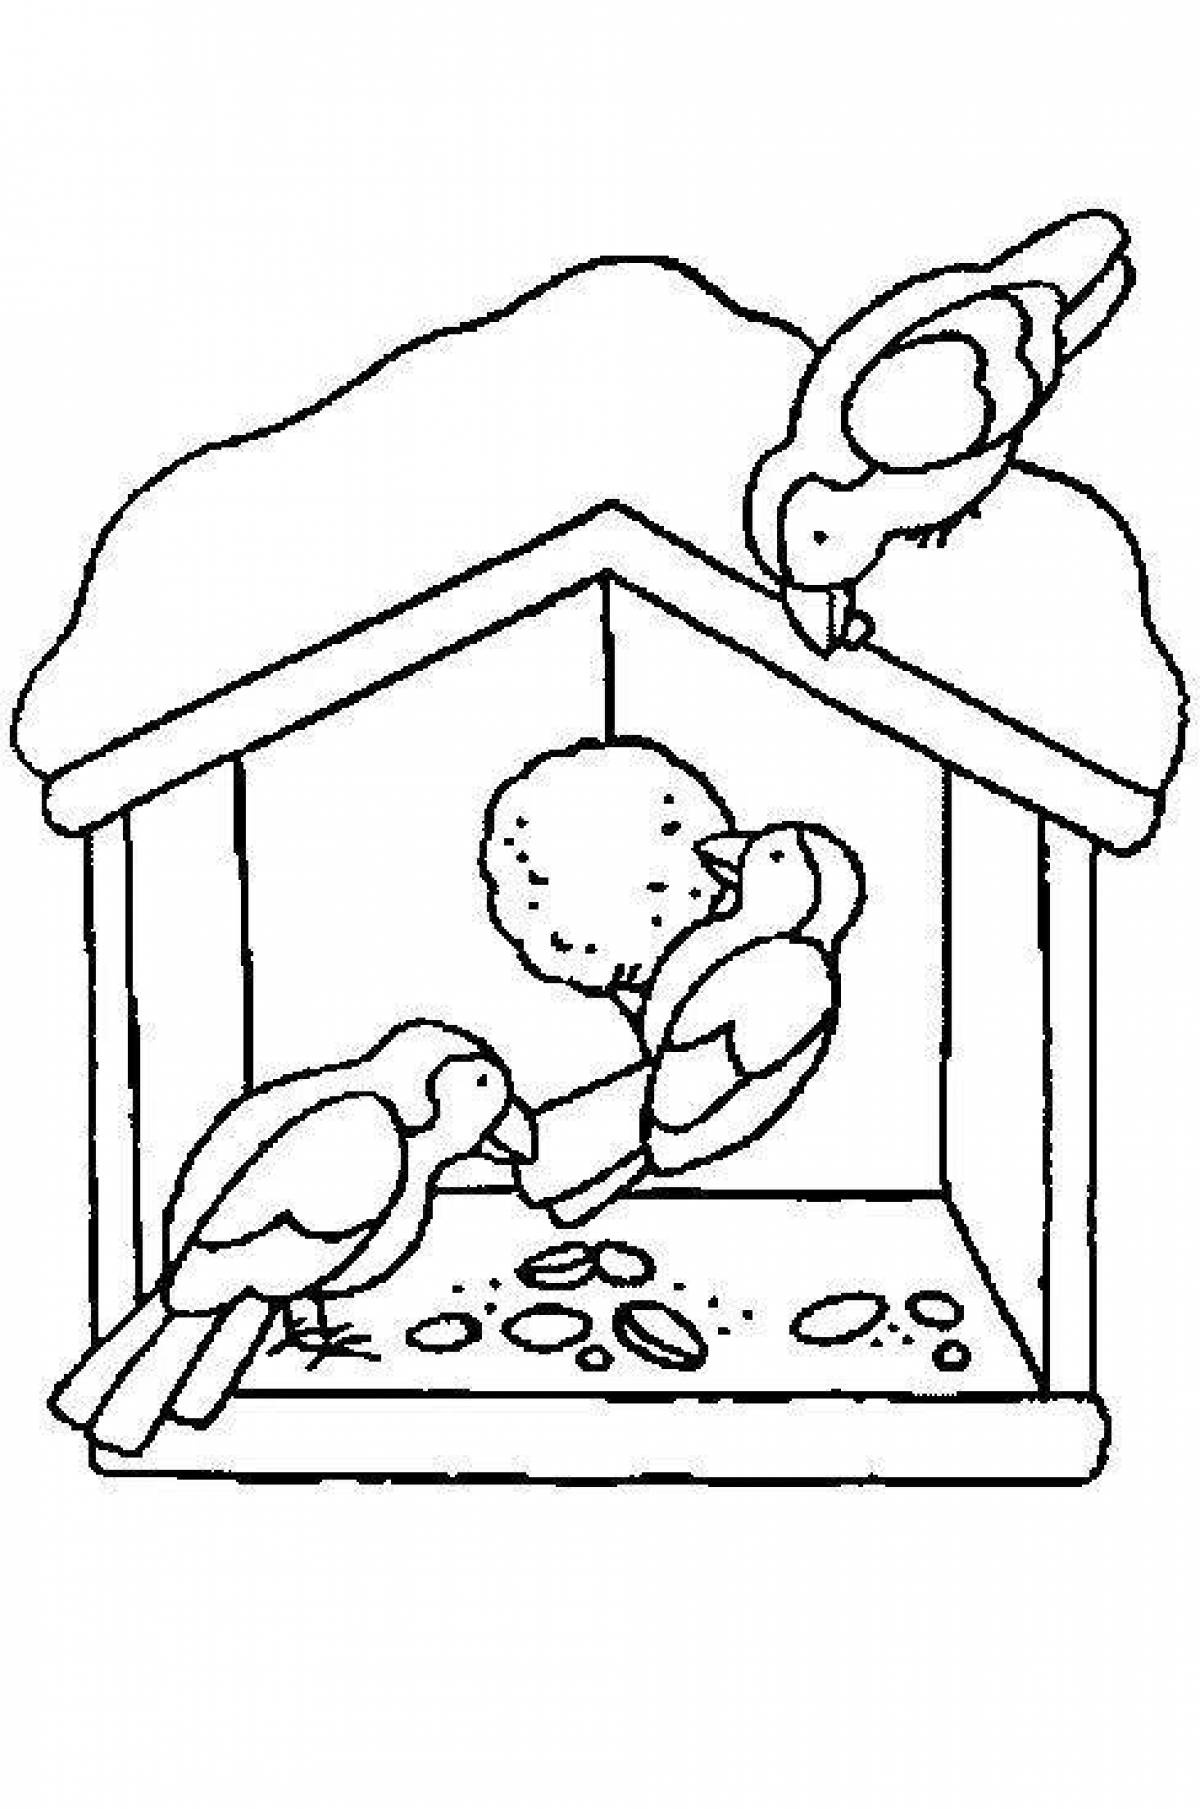 Magic bird feeder coloring book for kids in winter